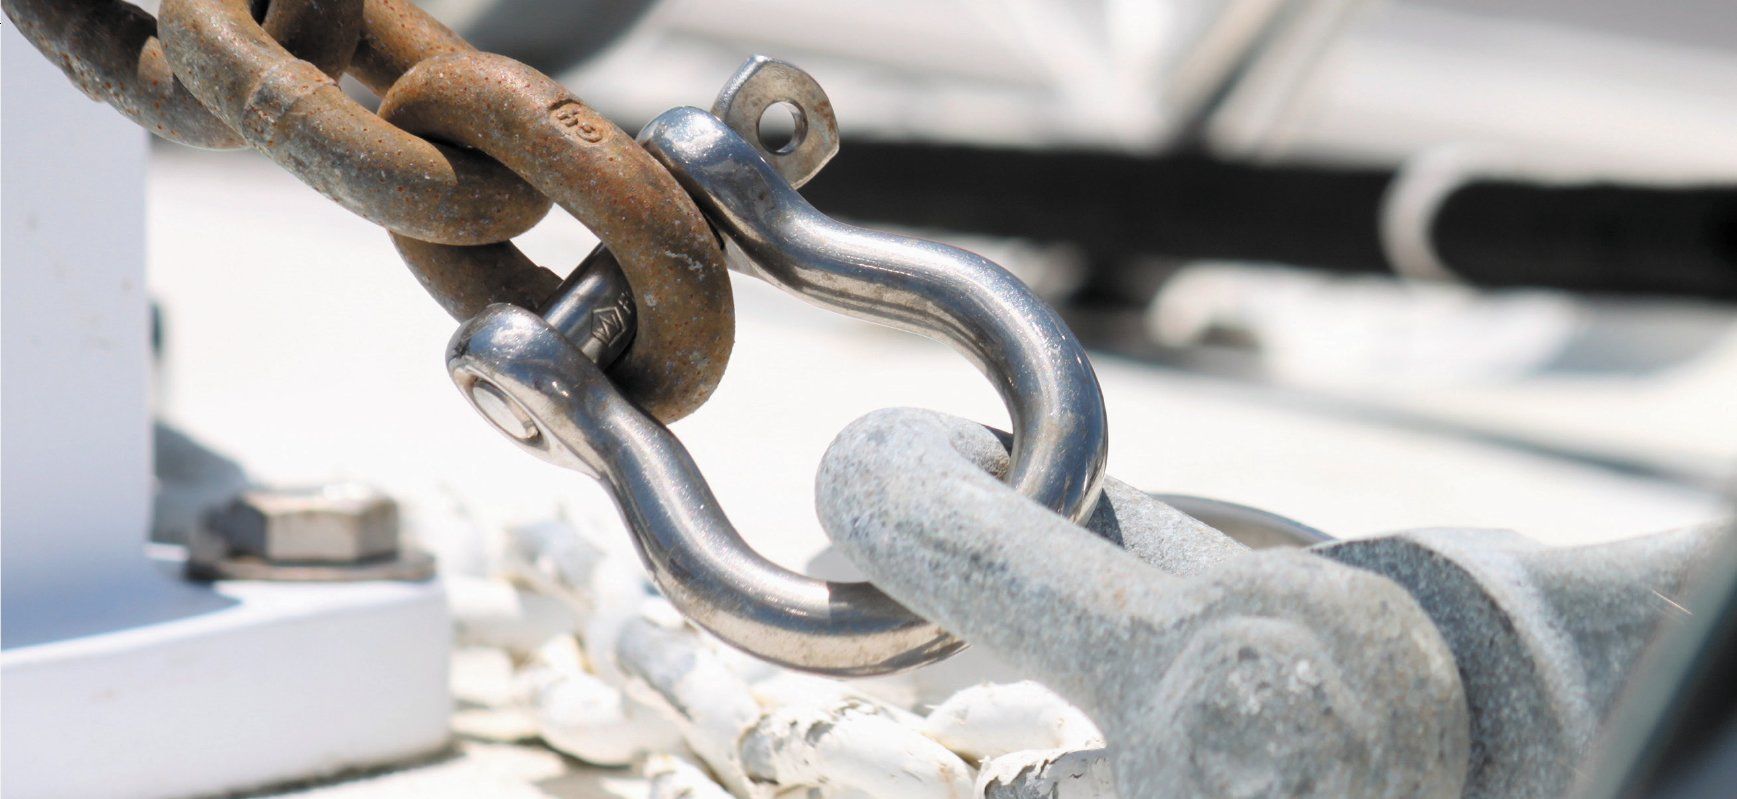 Stainless-steel shackles